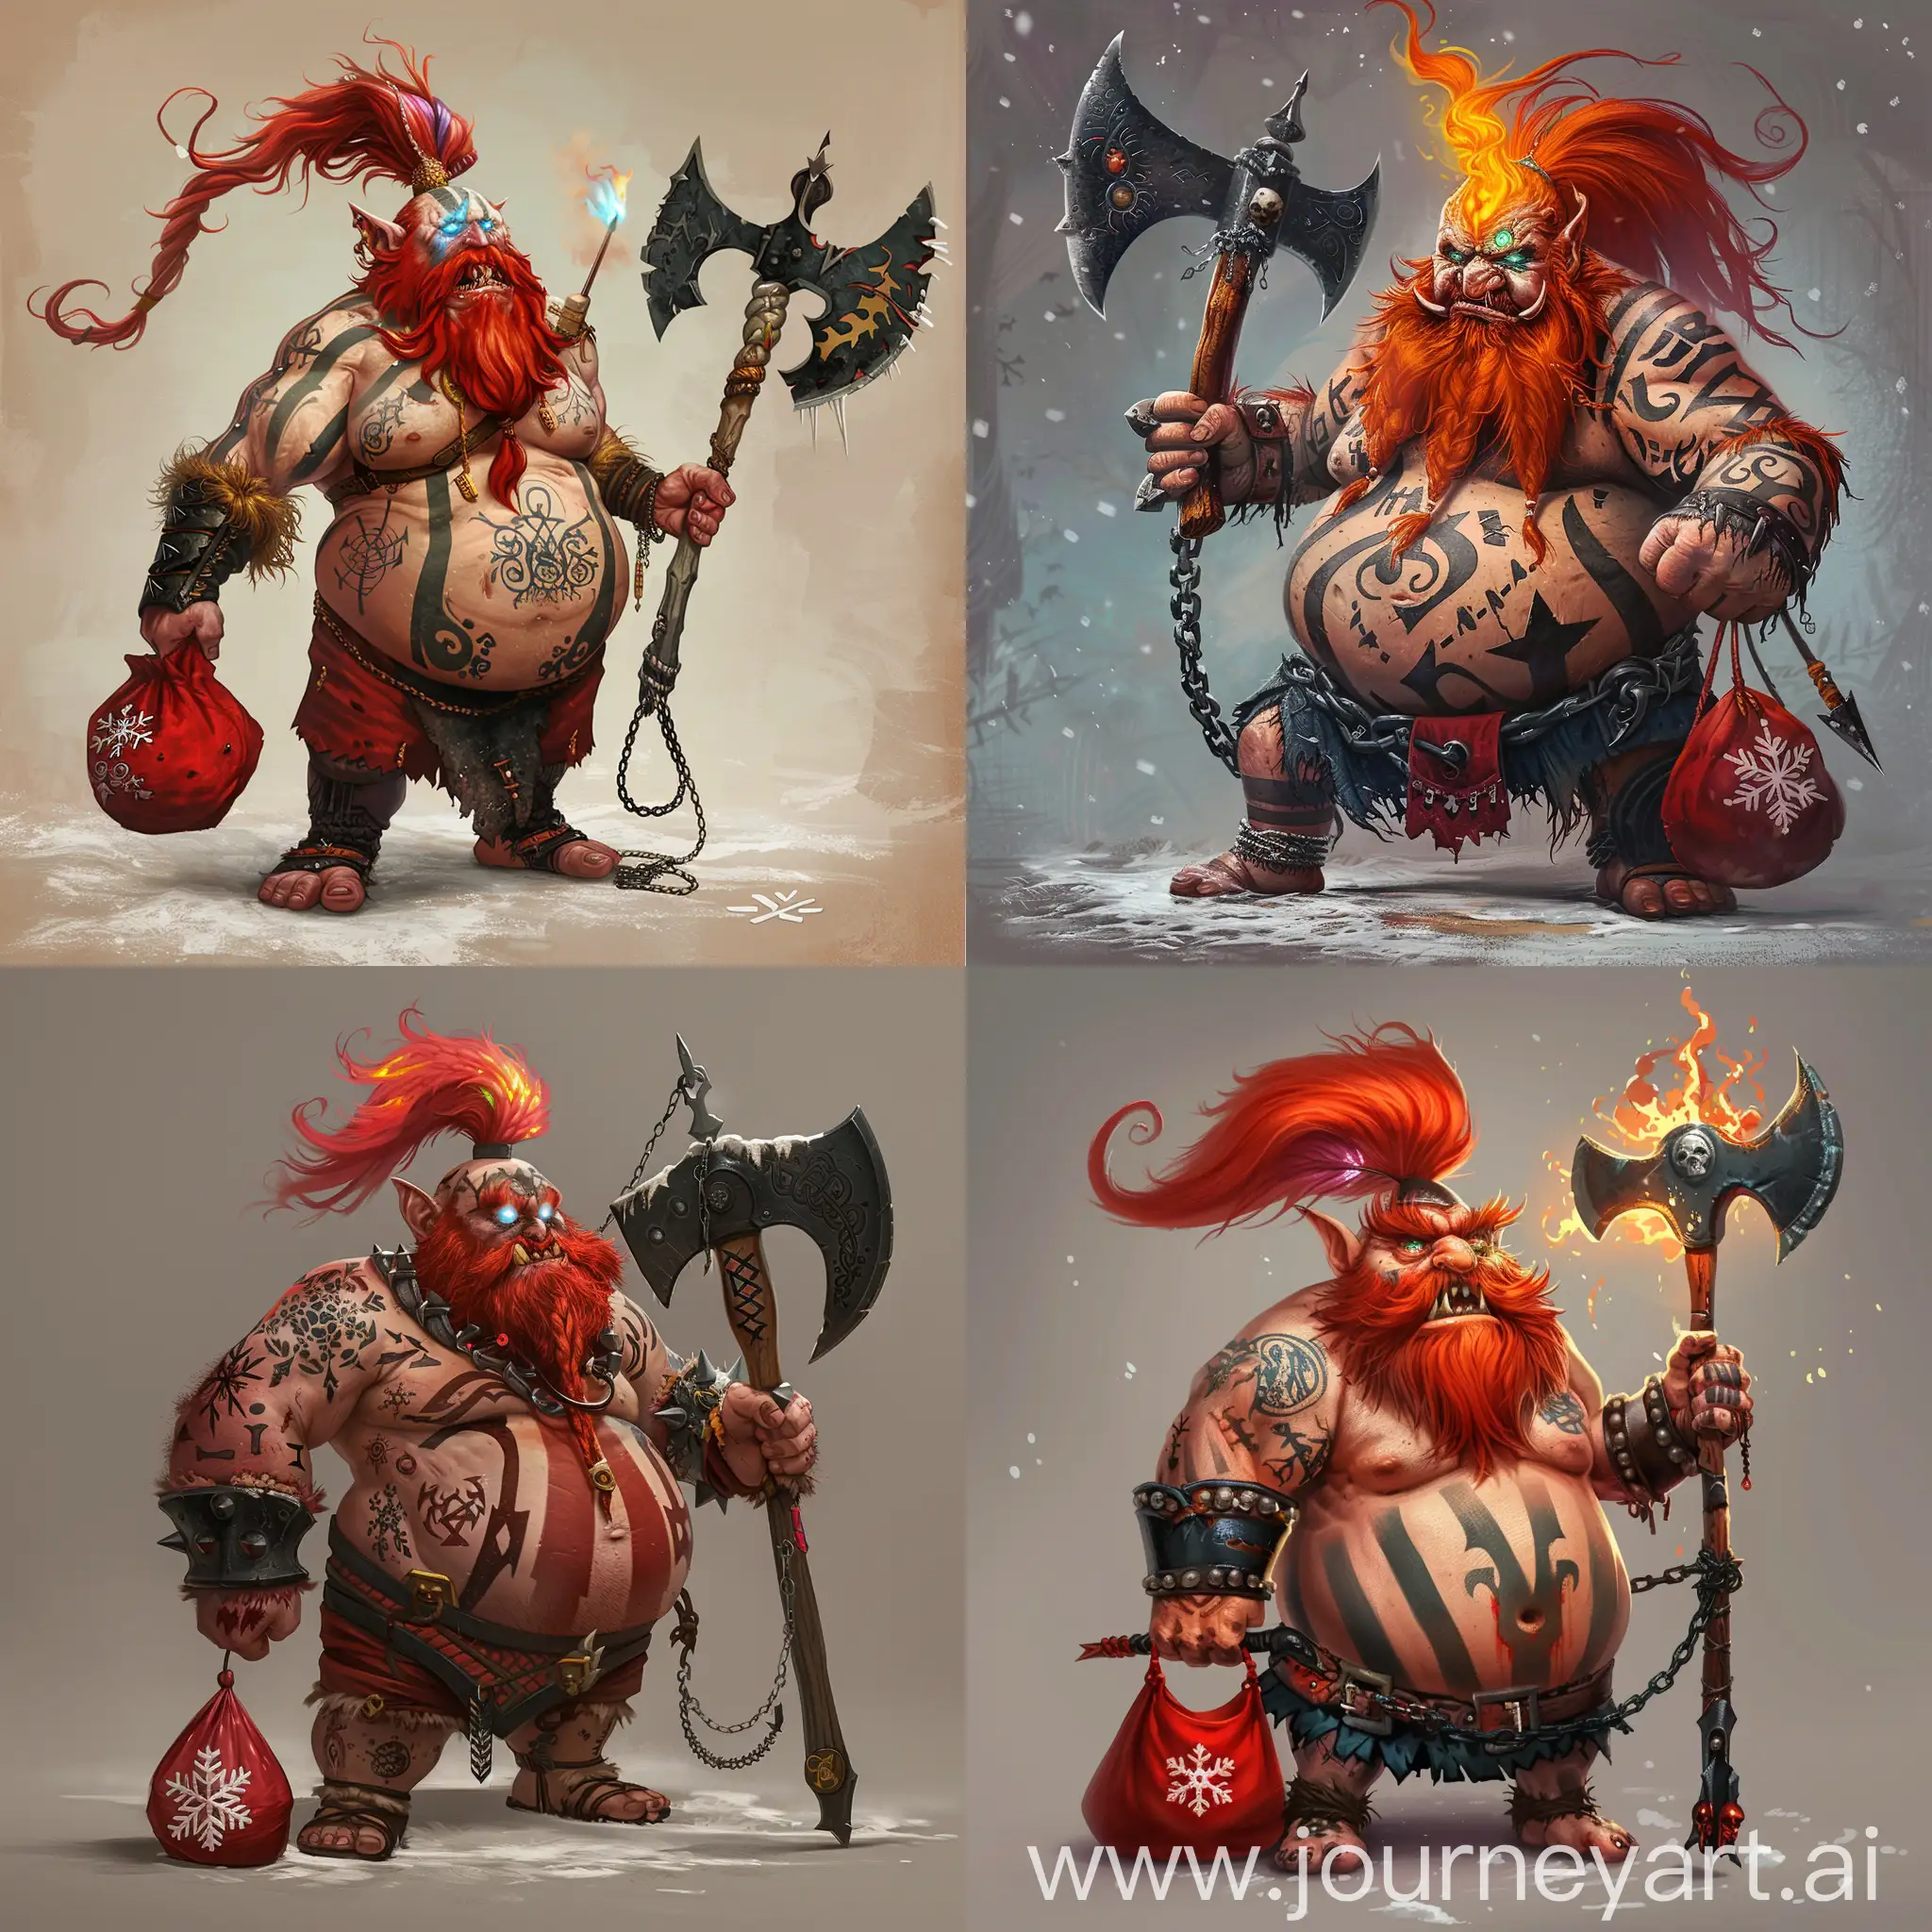 a fat barbarian dwarf named Bulgur is Red-haired, with a bare torso, red-haired with a long and wide tail of hair and a beard all in tattooed stripes all over his body, a small red bag with snowflakes on his belly, all ablaze with magic, his eyes burn with rainbow fire, evil yells at the top of his throat, brandishing a black metal axe on a chain (the chain is wound around the hand with which he holds an axe), despite the evil expression on his face, he is quite kind and iron-loving, an epic fantasy art character